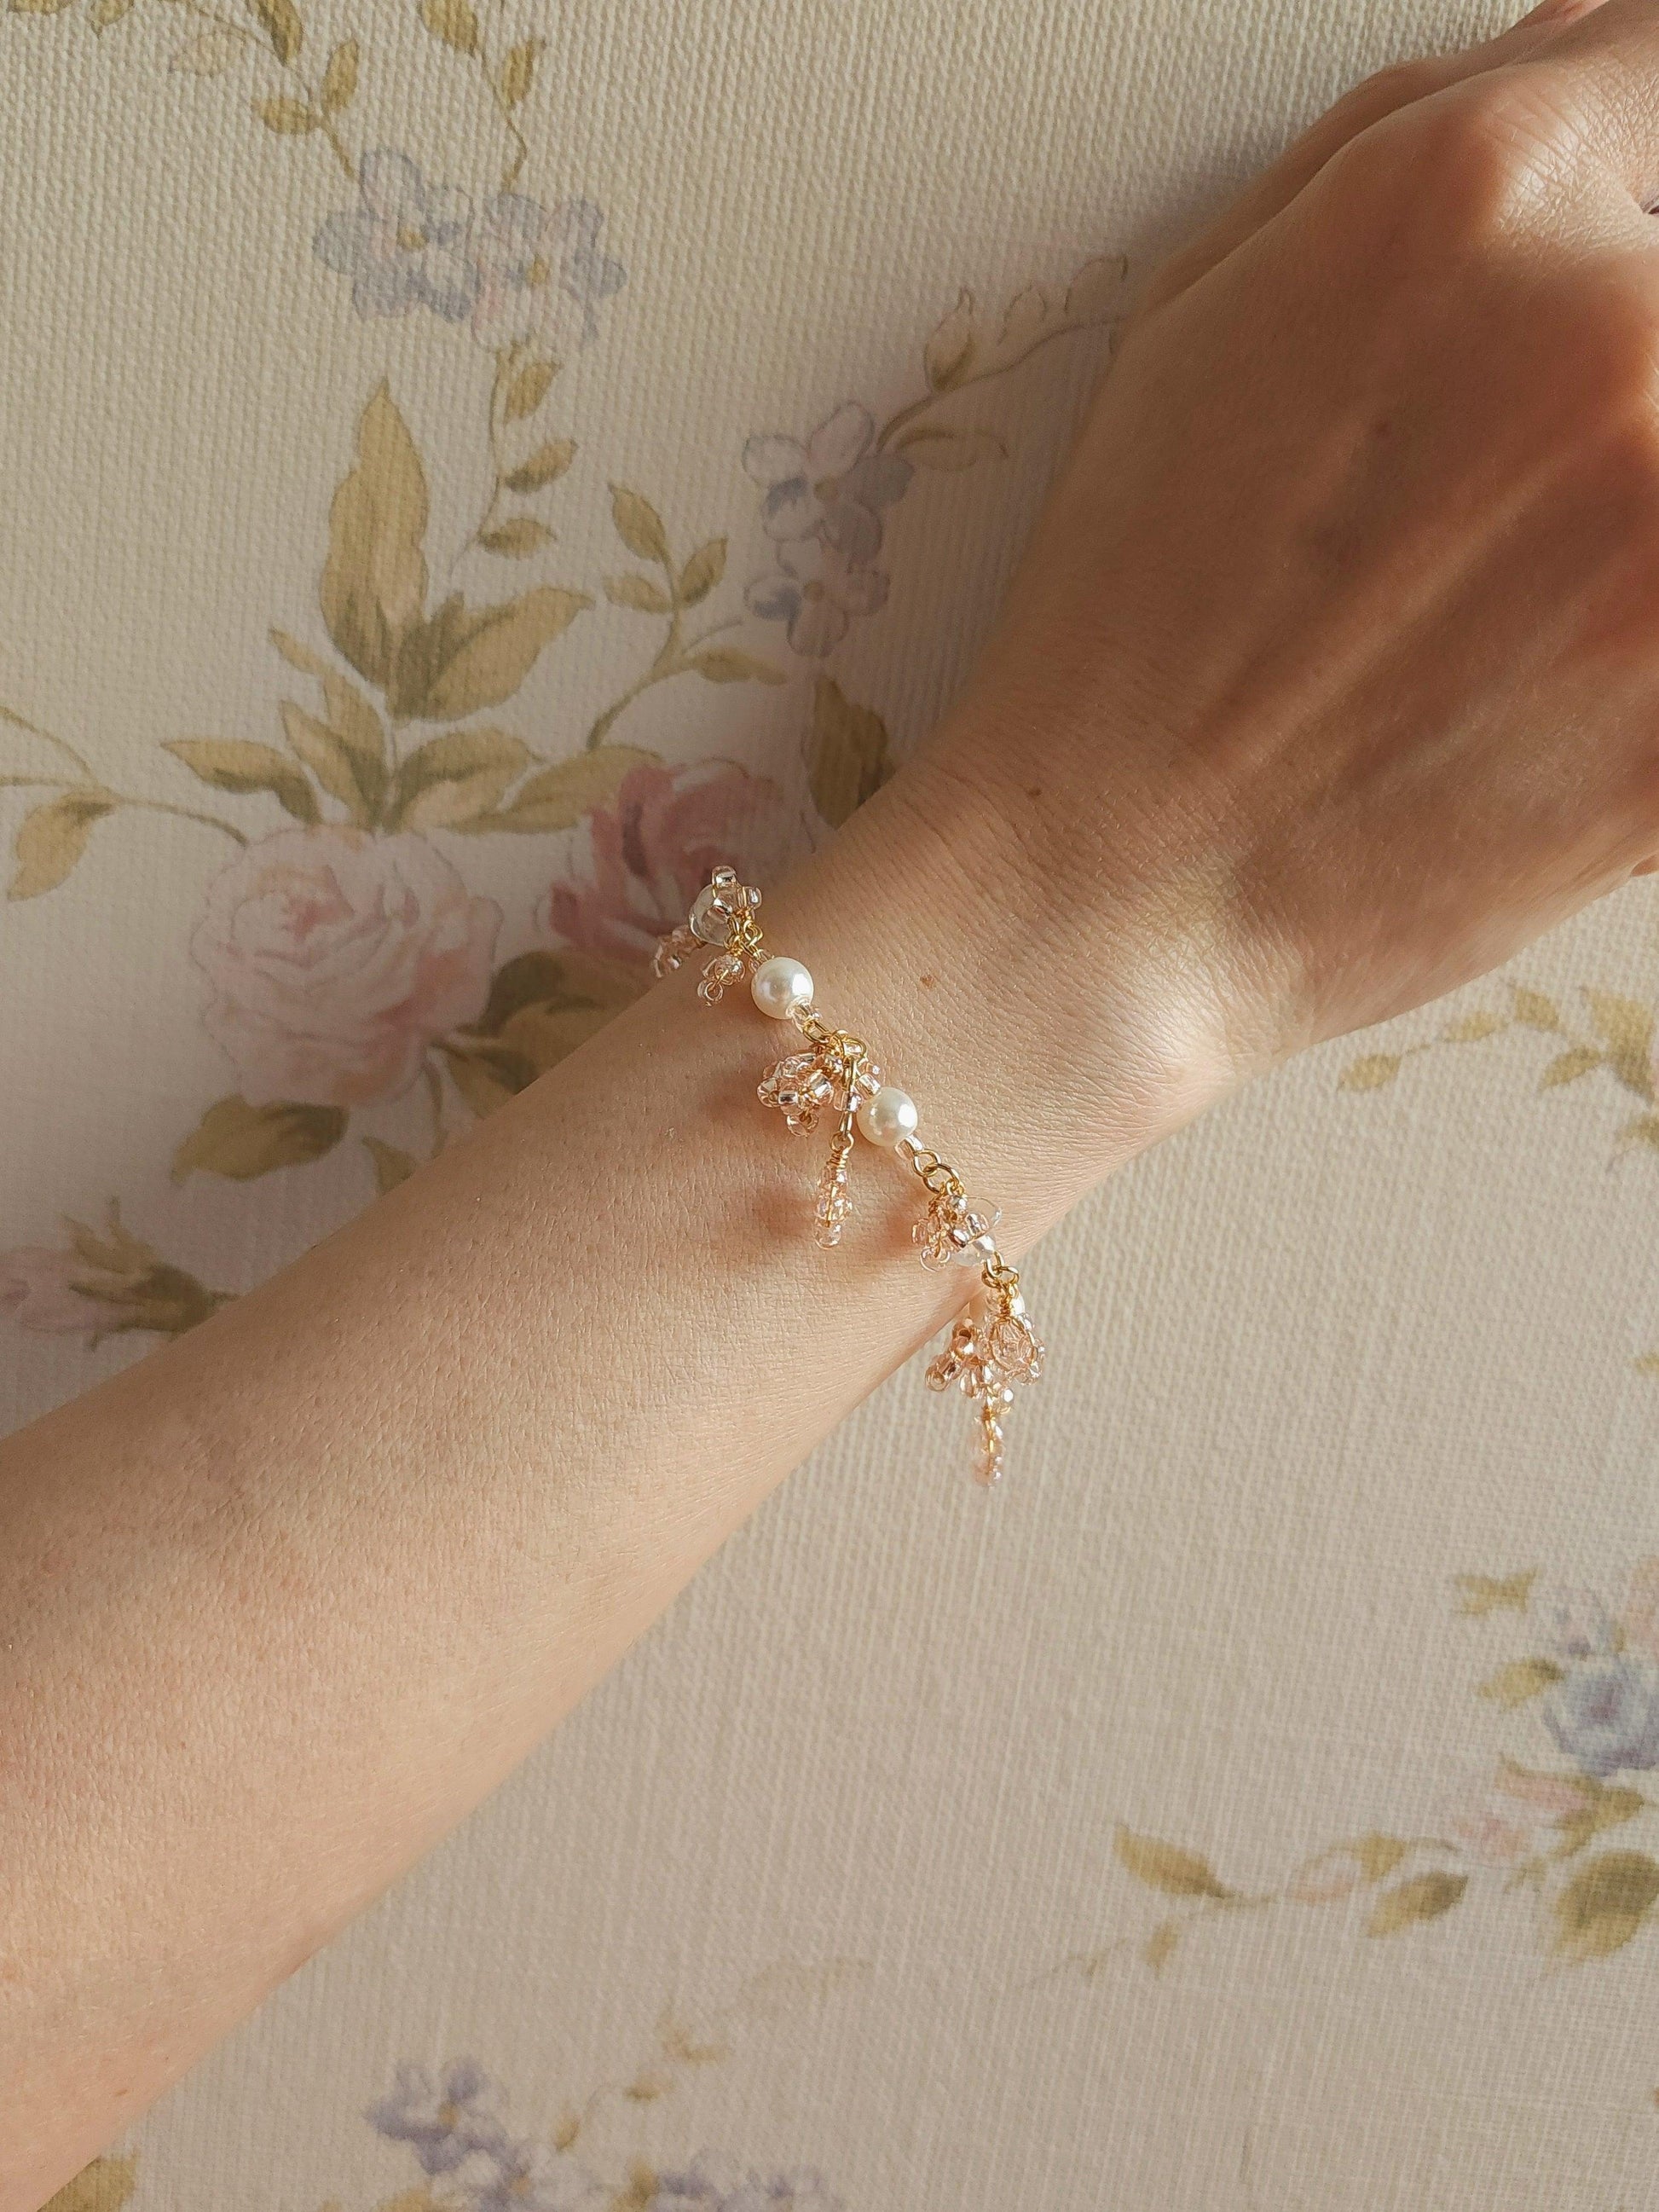 Fairy Pink Blossoms Bracelet - By Cocoyu